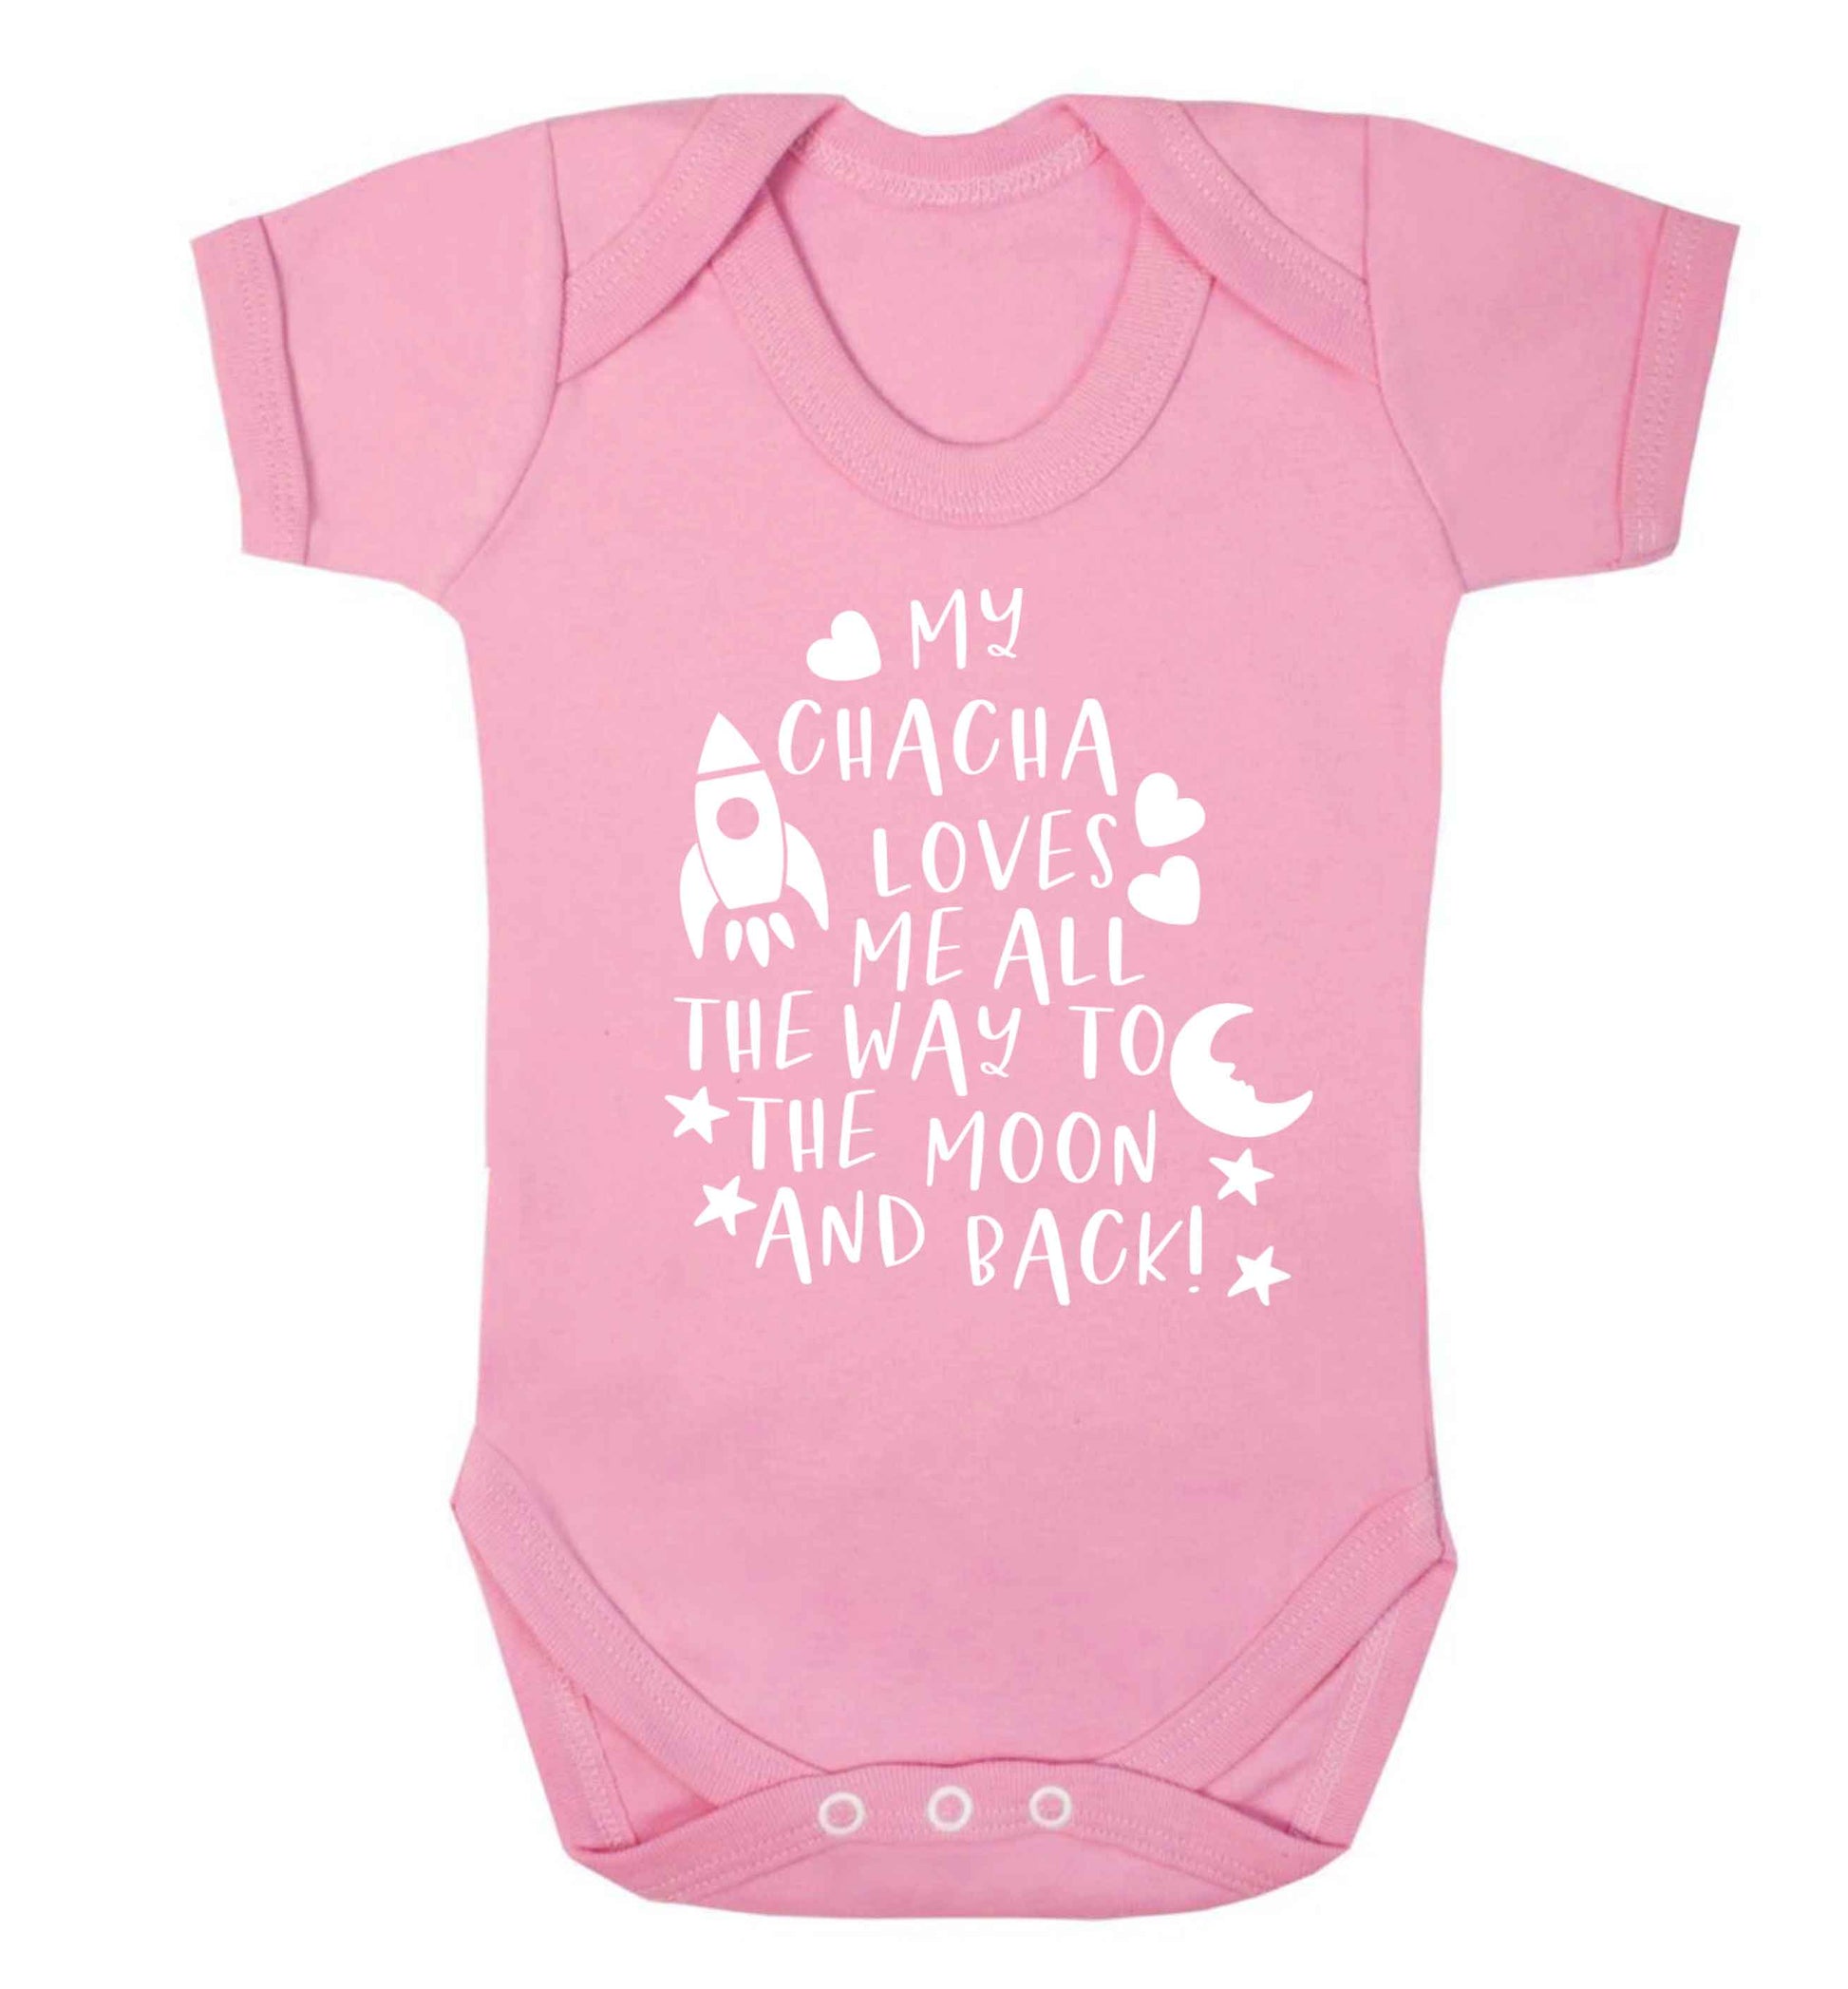 My chacha loves me all the way to the moon and back Baby Vest pale pink 18-24 months